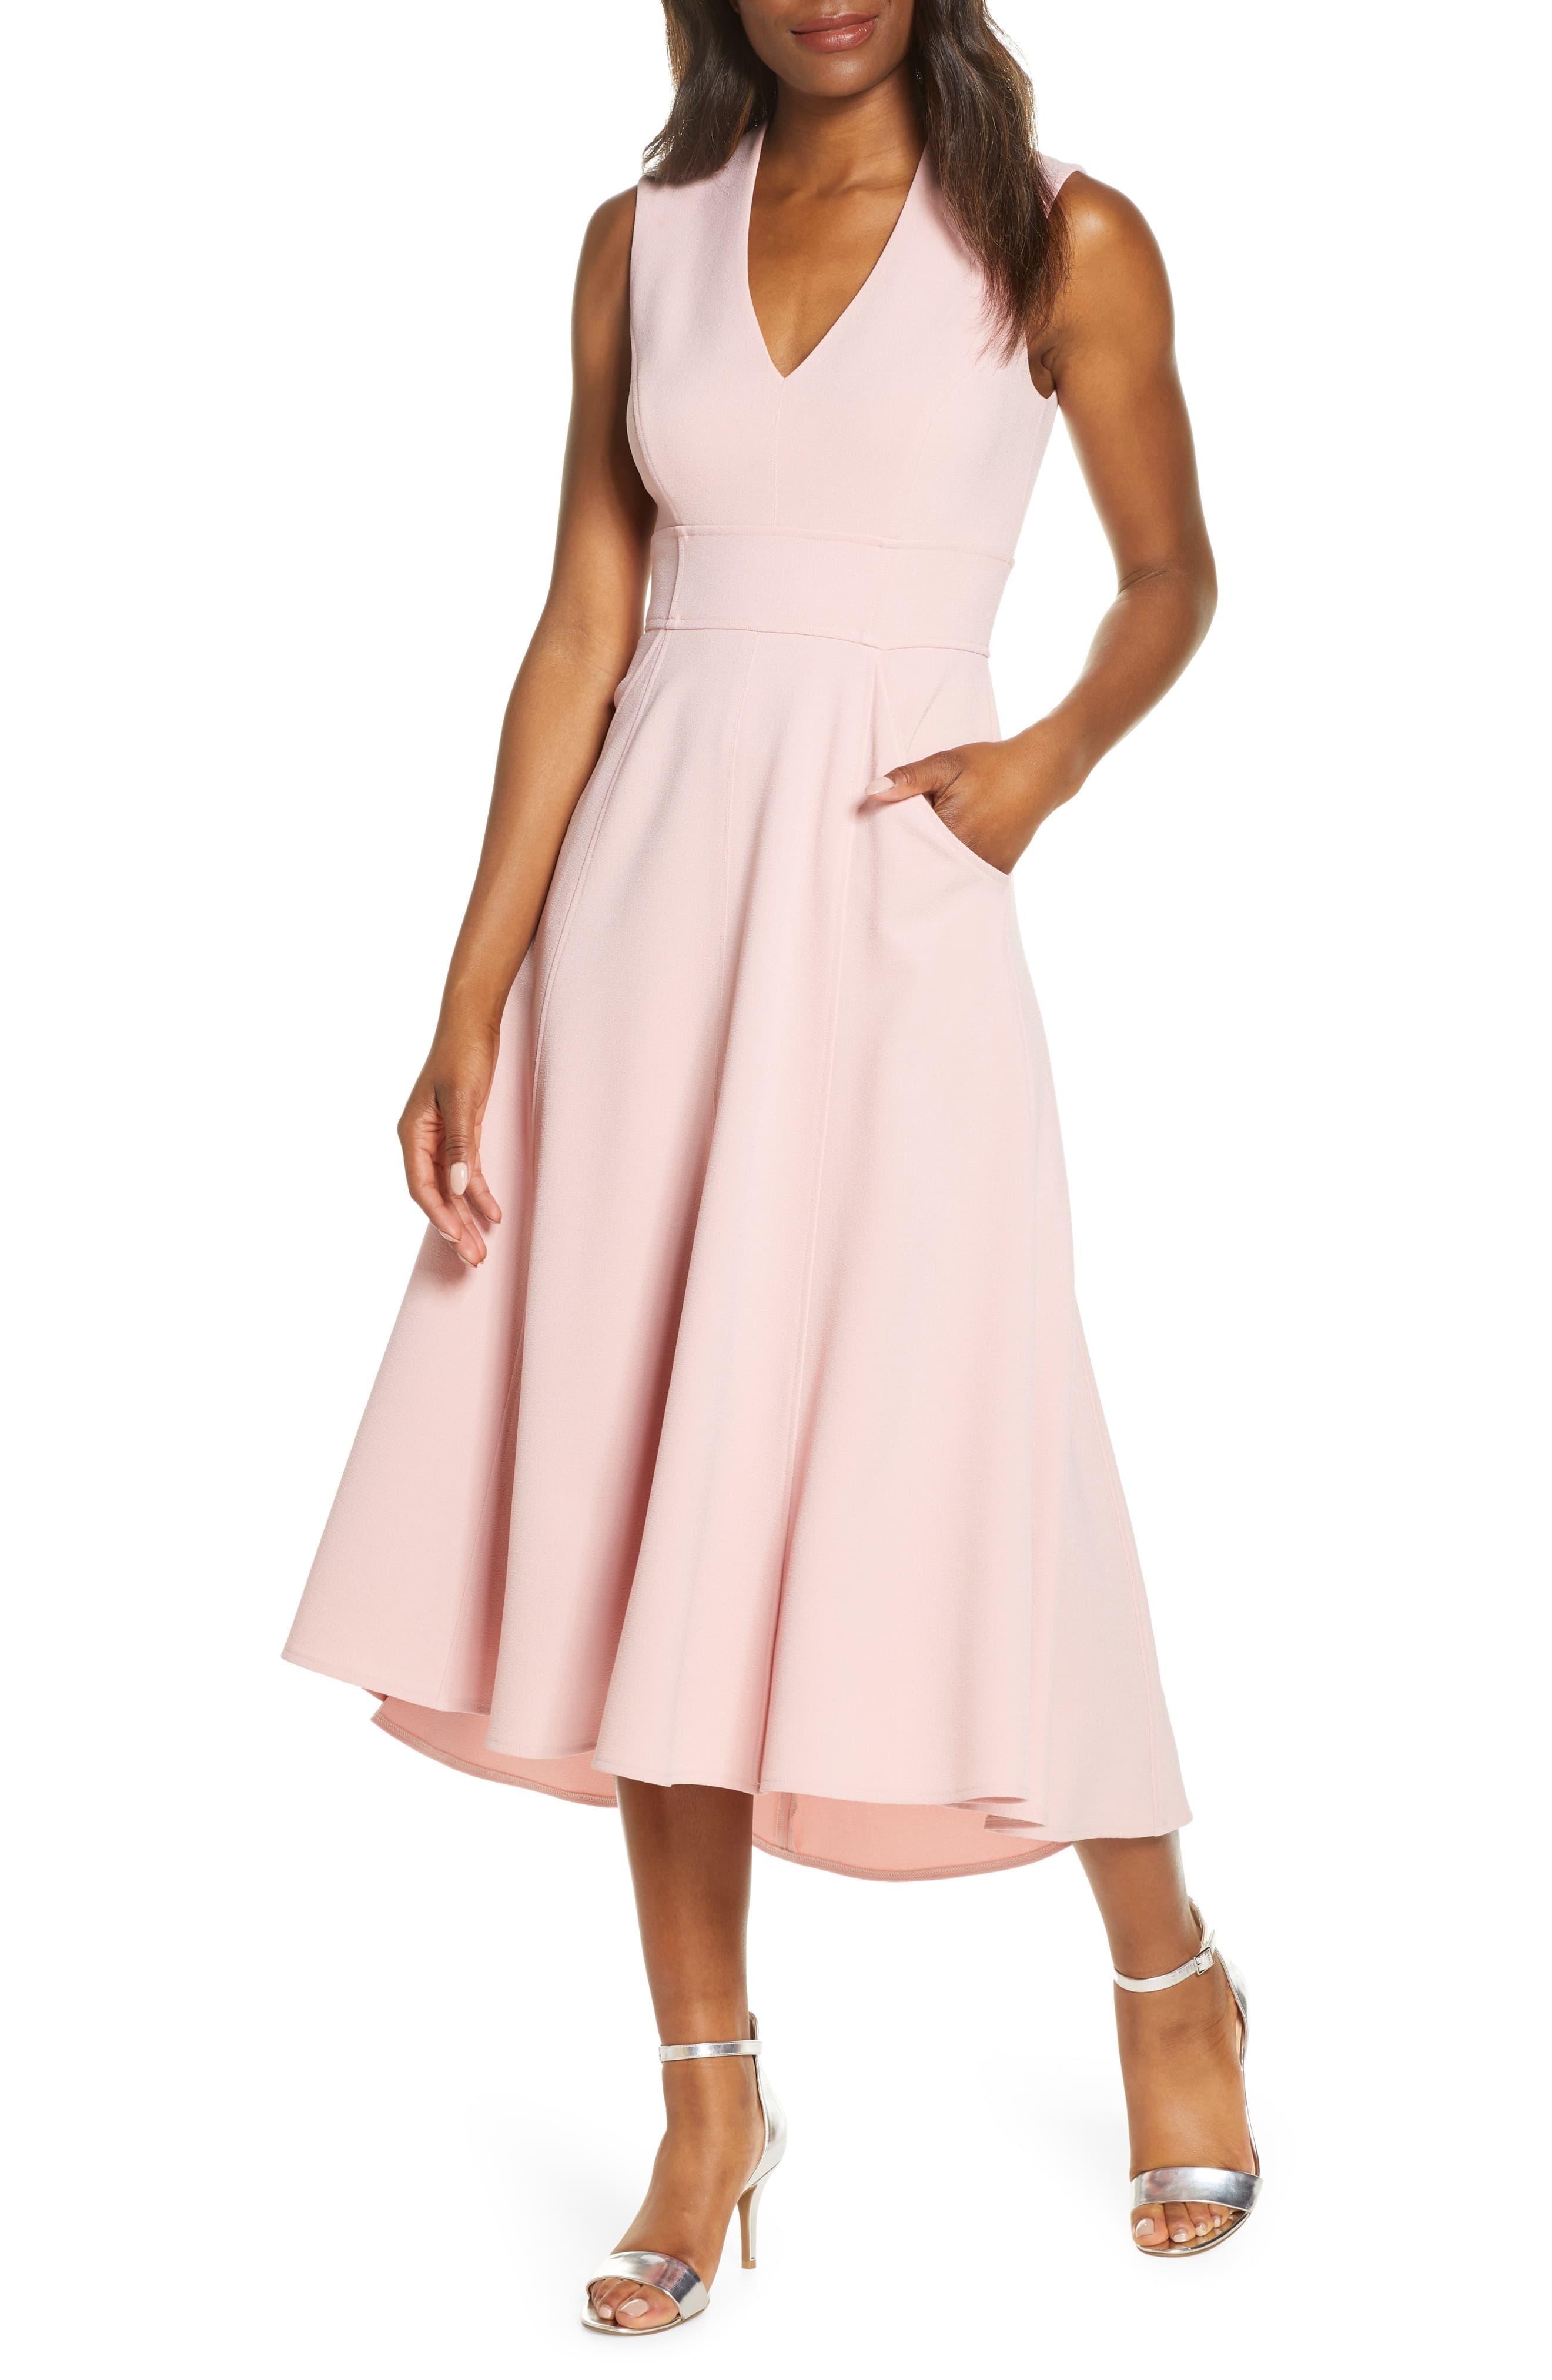 Eliza J High/low Fit & Flare Dress in Blush (Pink) - Save 60% - Lyst